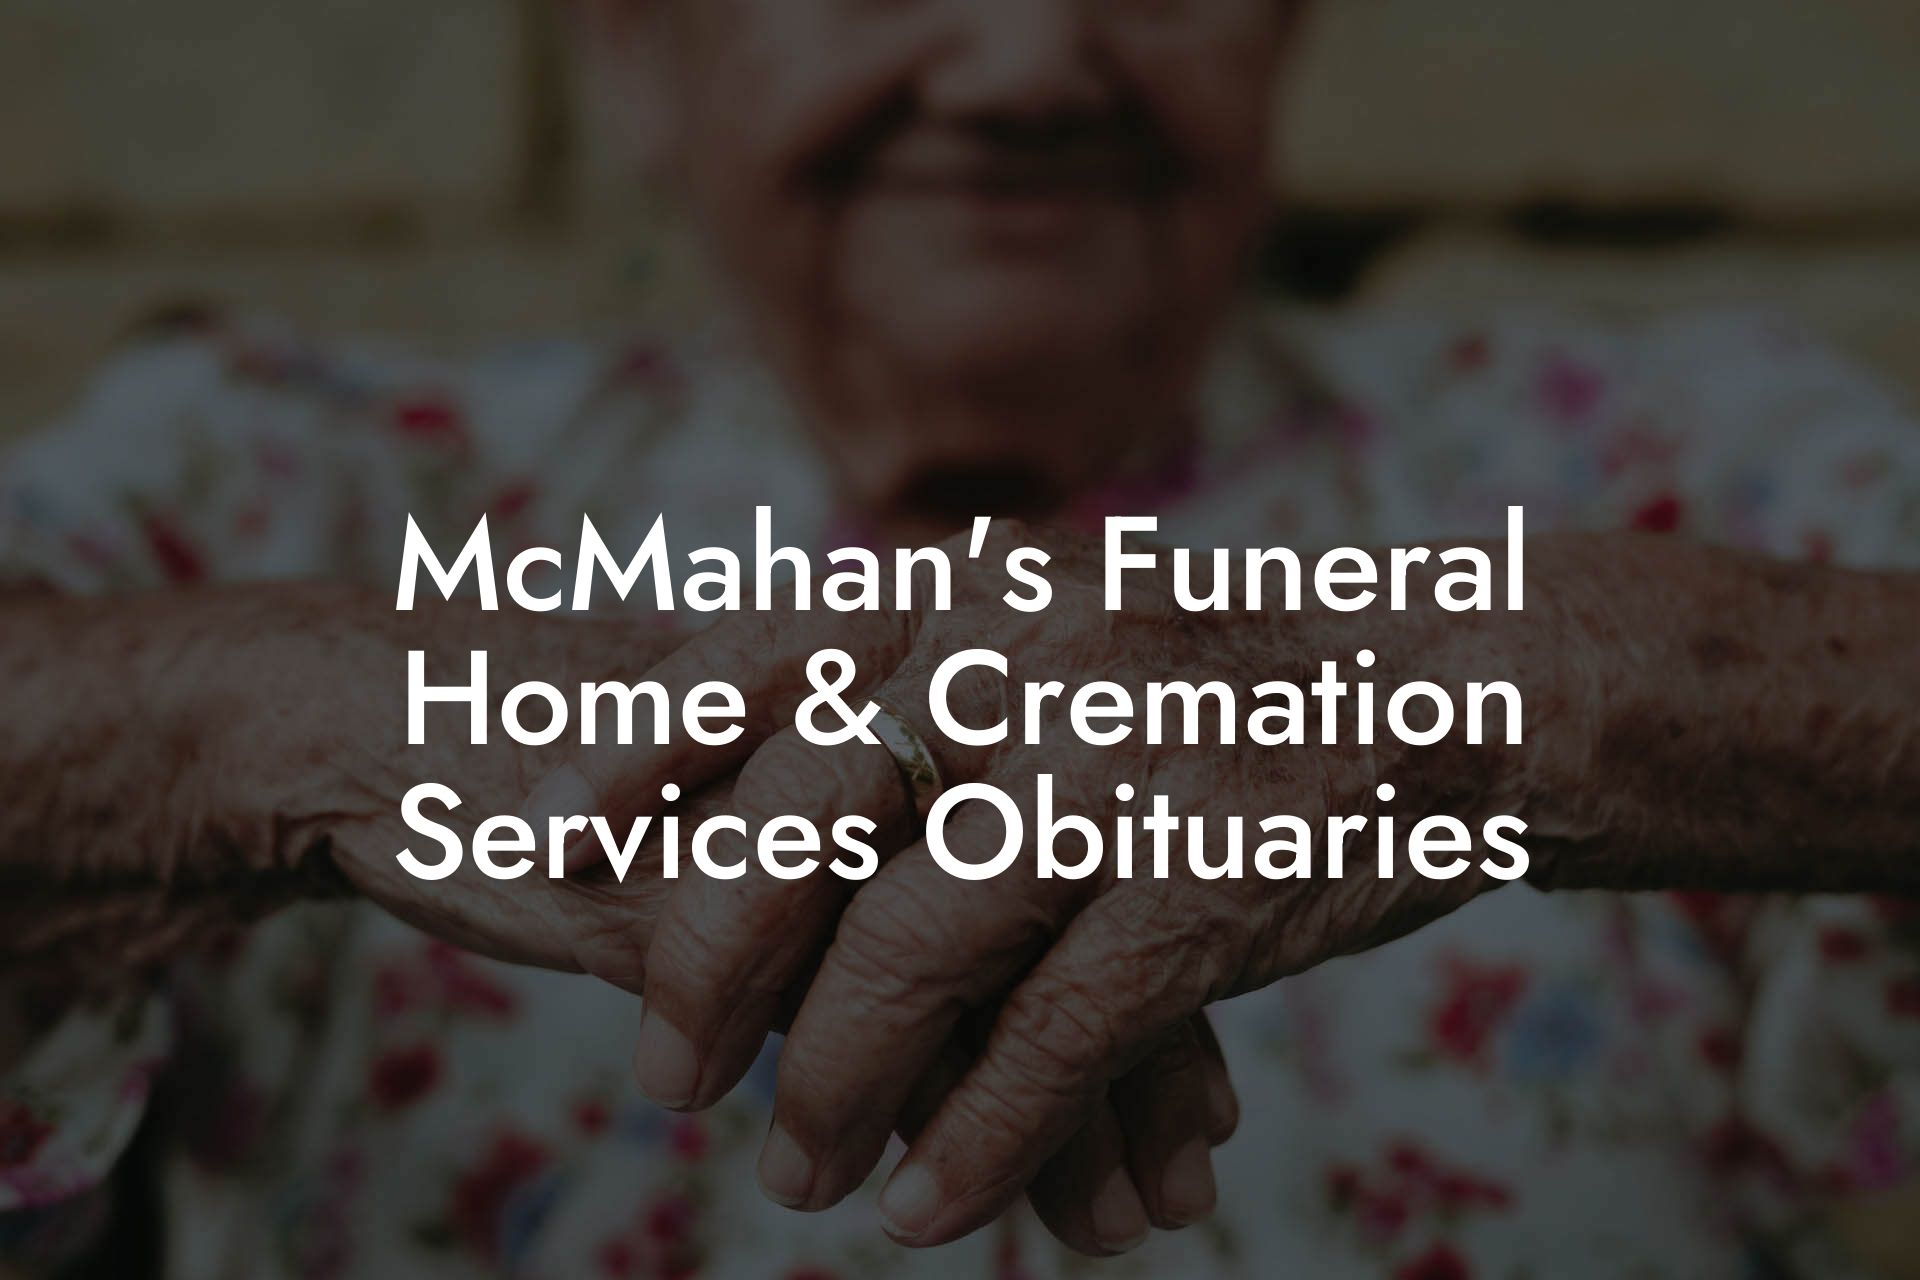 McMahan's Funeral Home & Cremation Services Obituaries